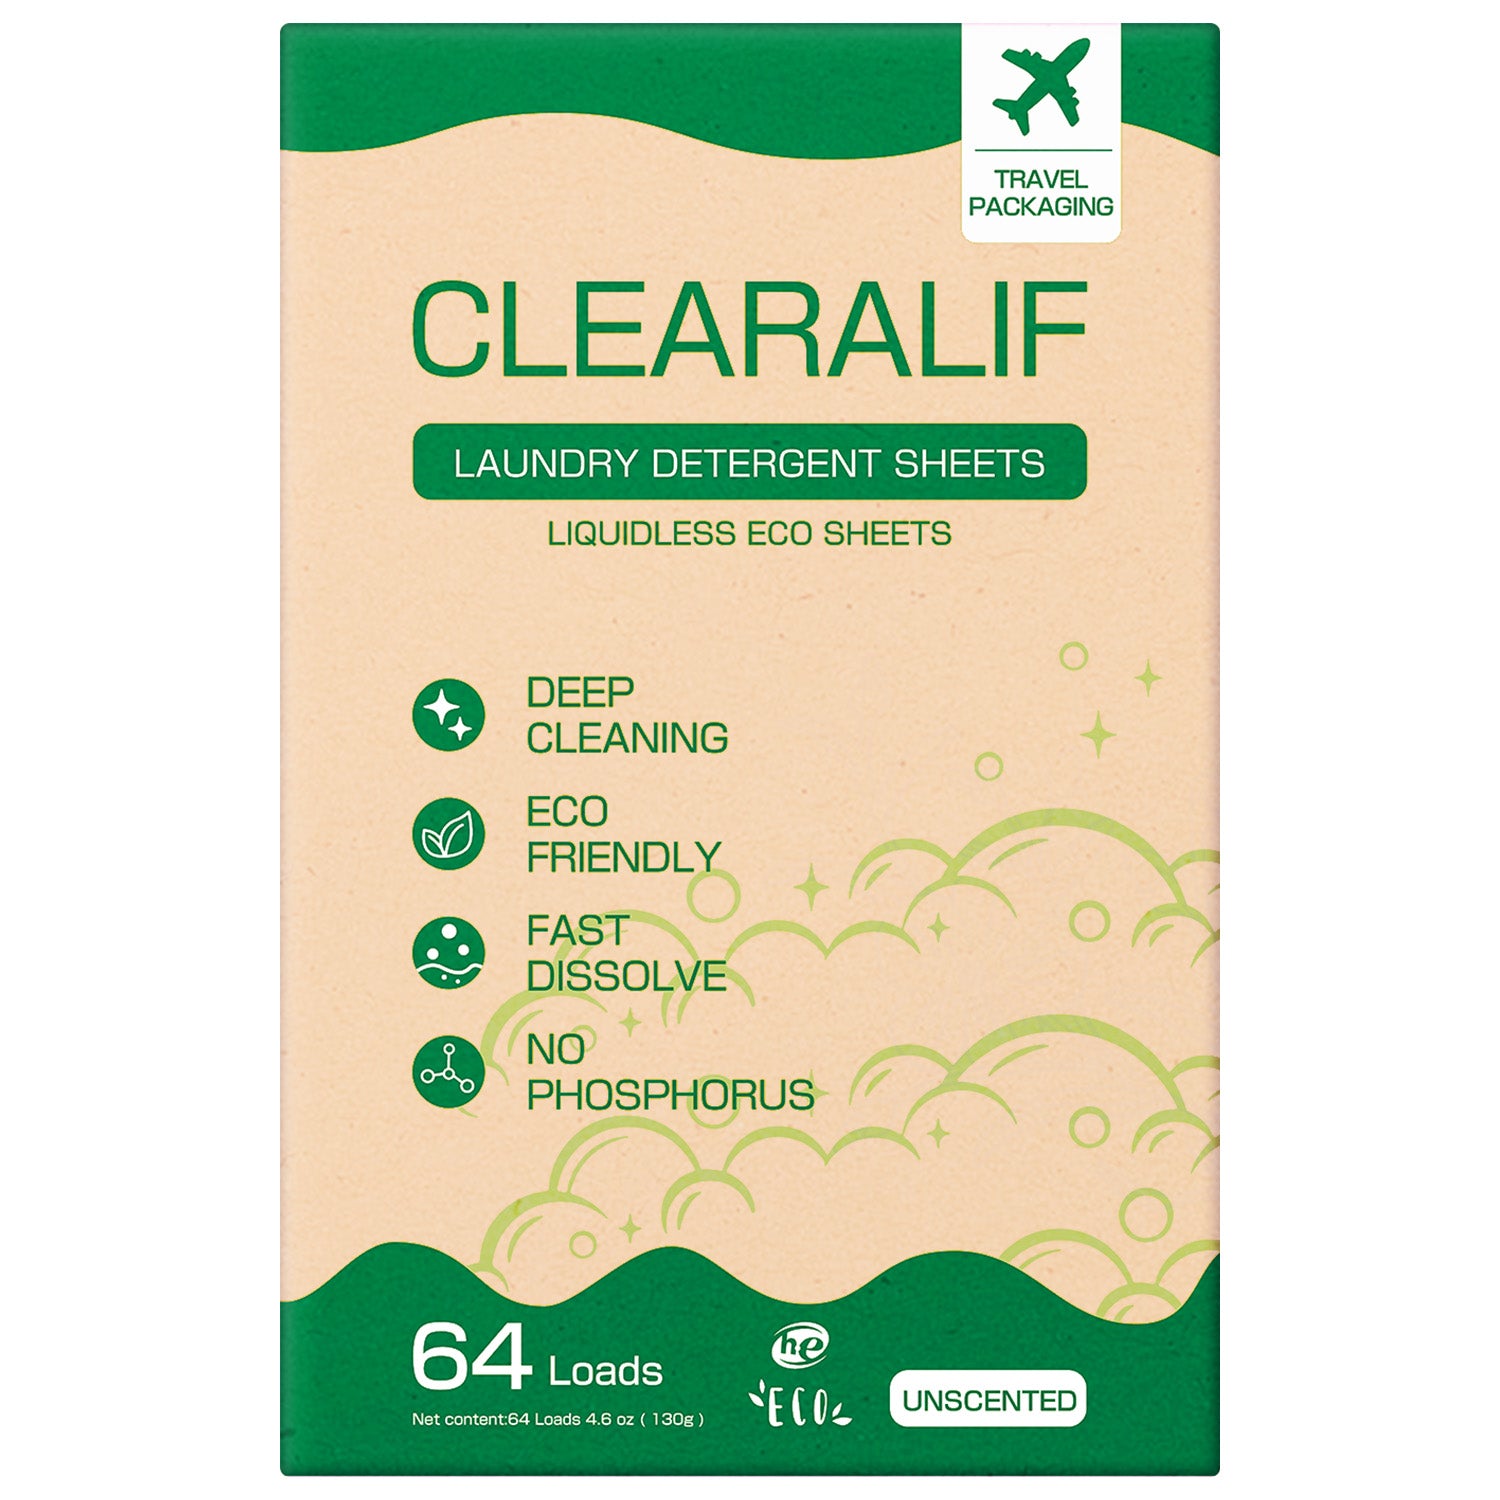 CLEARALIF Eco Friendly & Hypoallergenic Laundry Detergent 64 Loads, Unscented